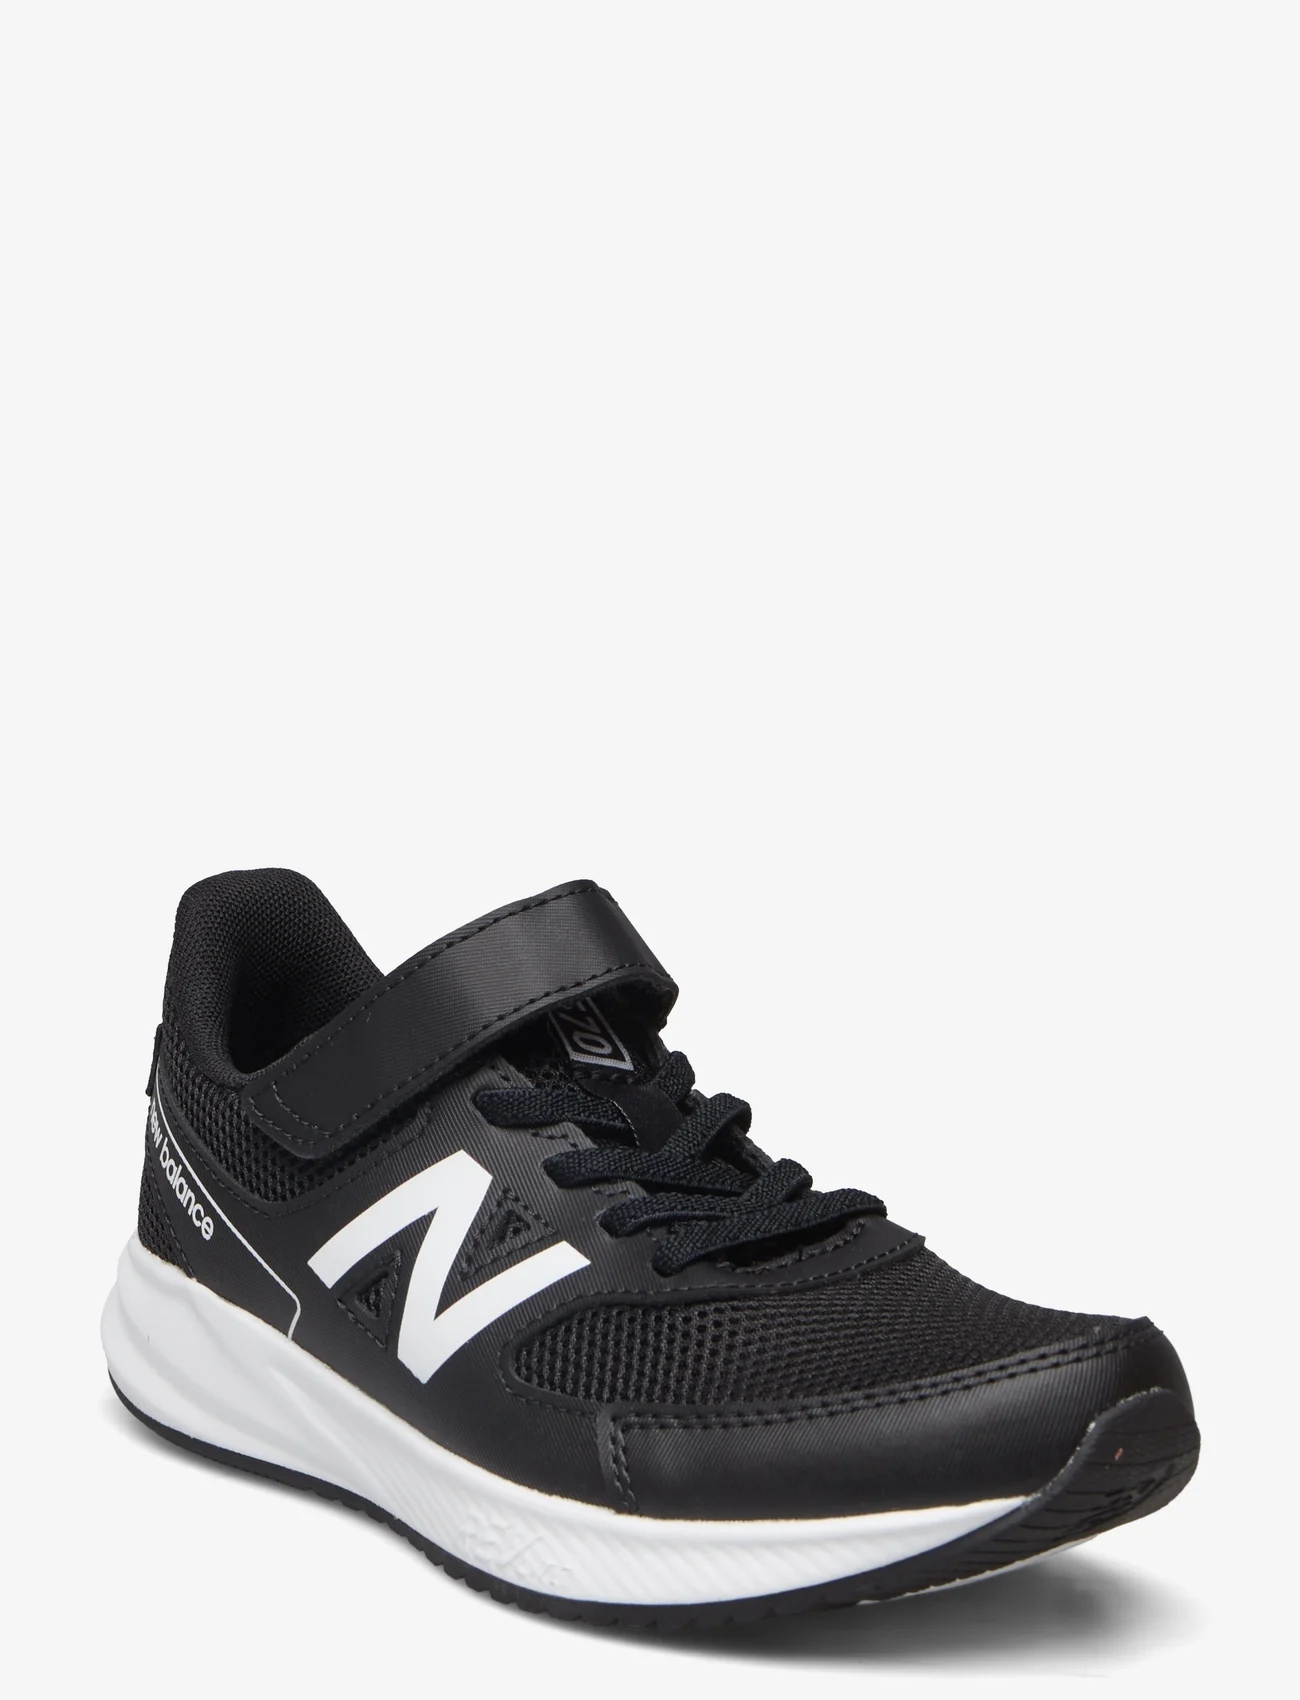 New Balance - New Balance 570 v3 Kids Bungee Lace with Hook & Loop Top Strap - buty do biegania - black - 0